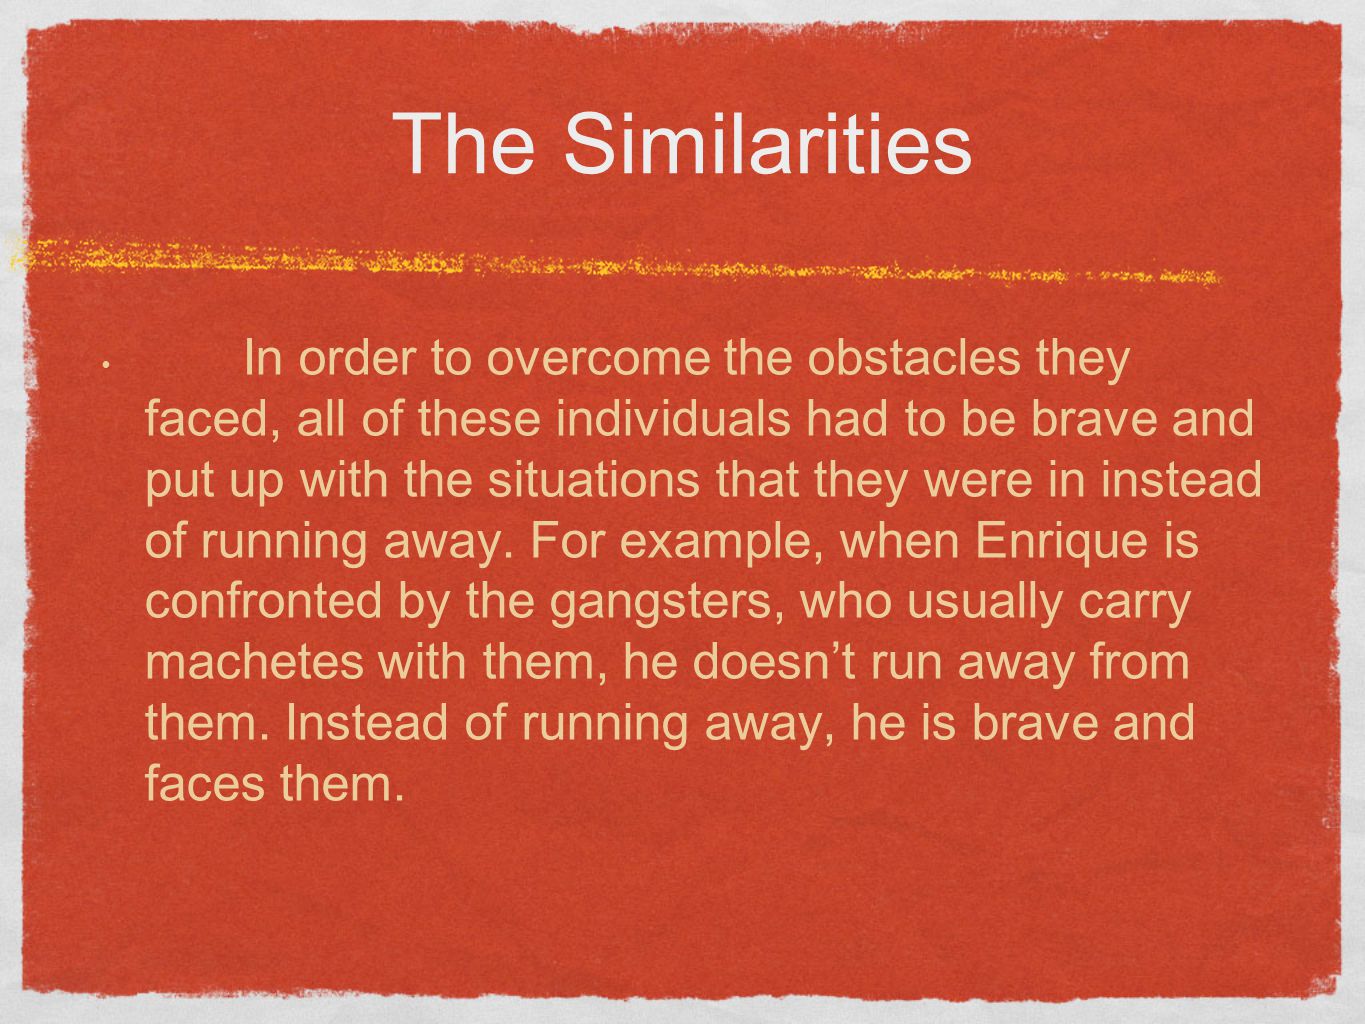 The Similarities In order to overcome the obstacles they faced, all of these individuals had to be brave and put up with the situations that they were in instead of running away.